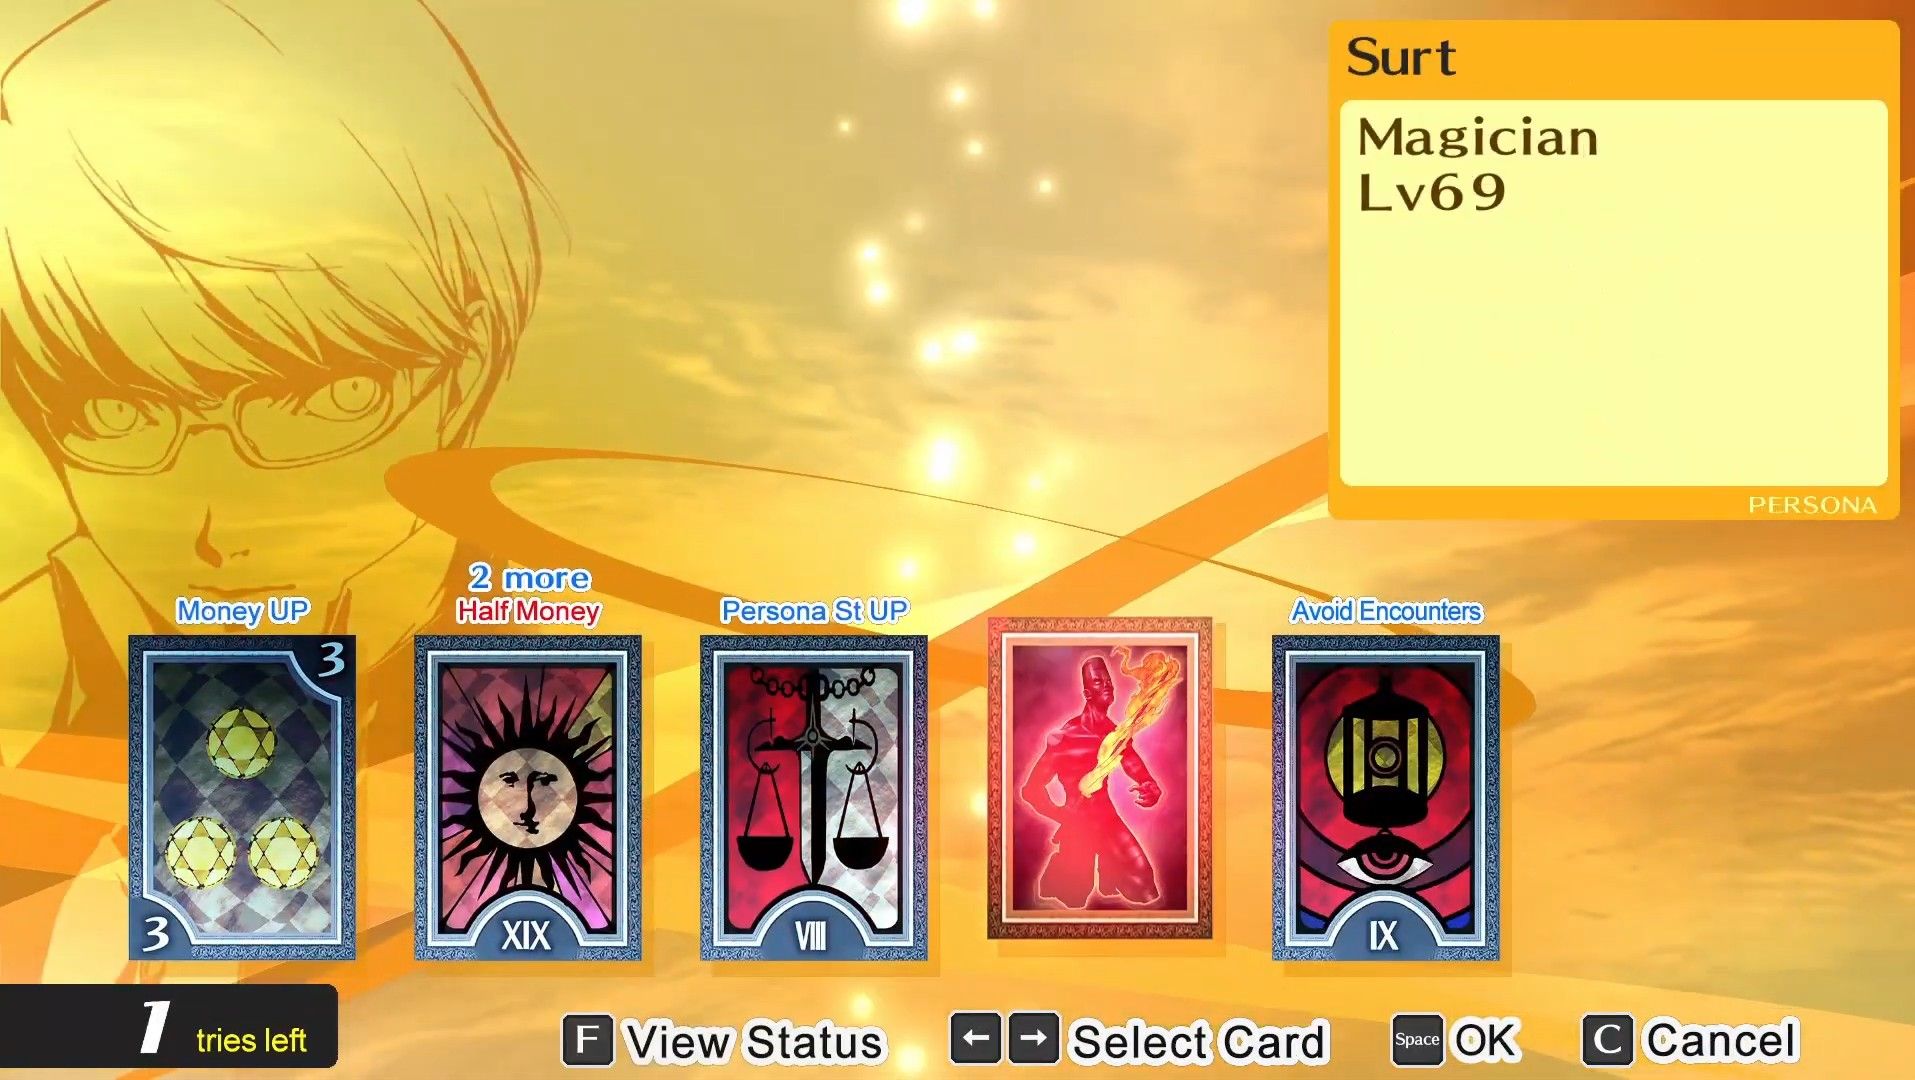 an example of shuffle time in persona 4 golden, highlighting the surt persona